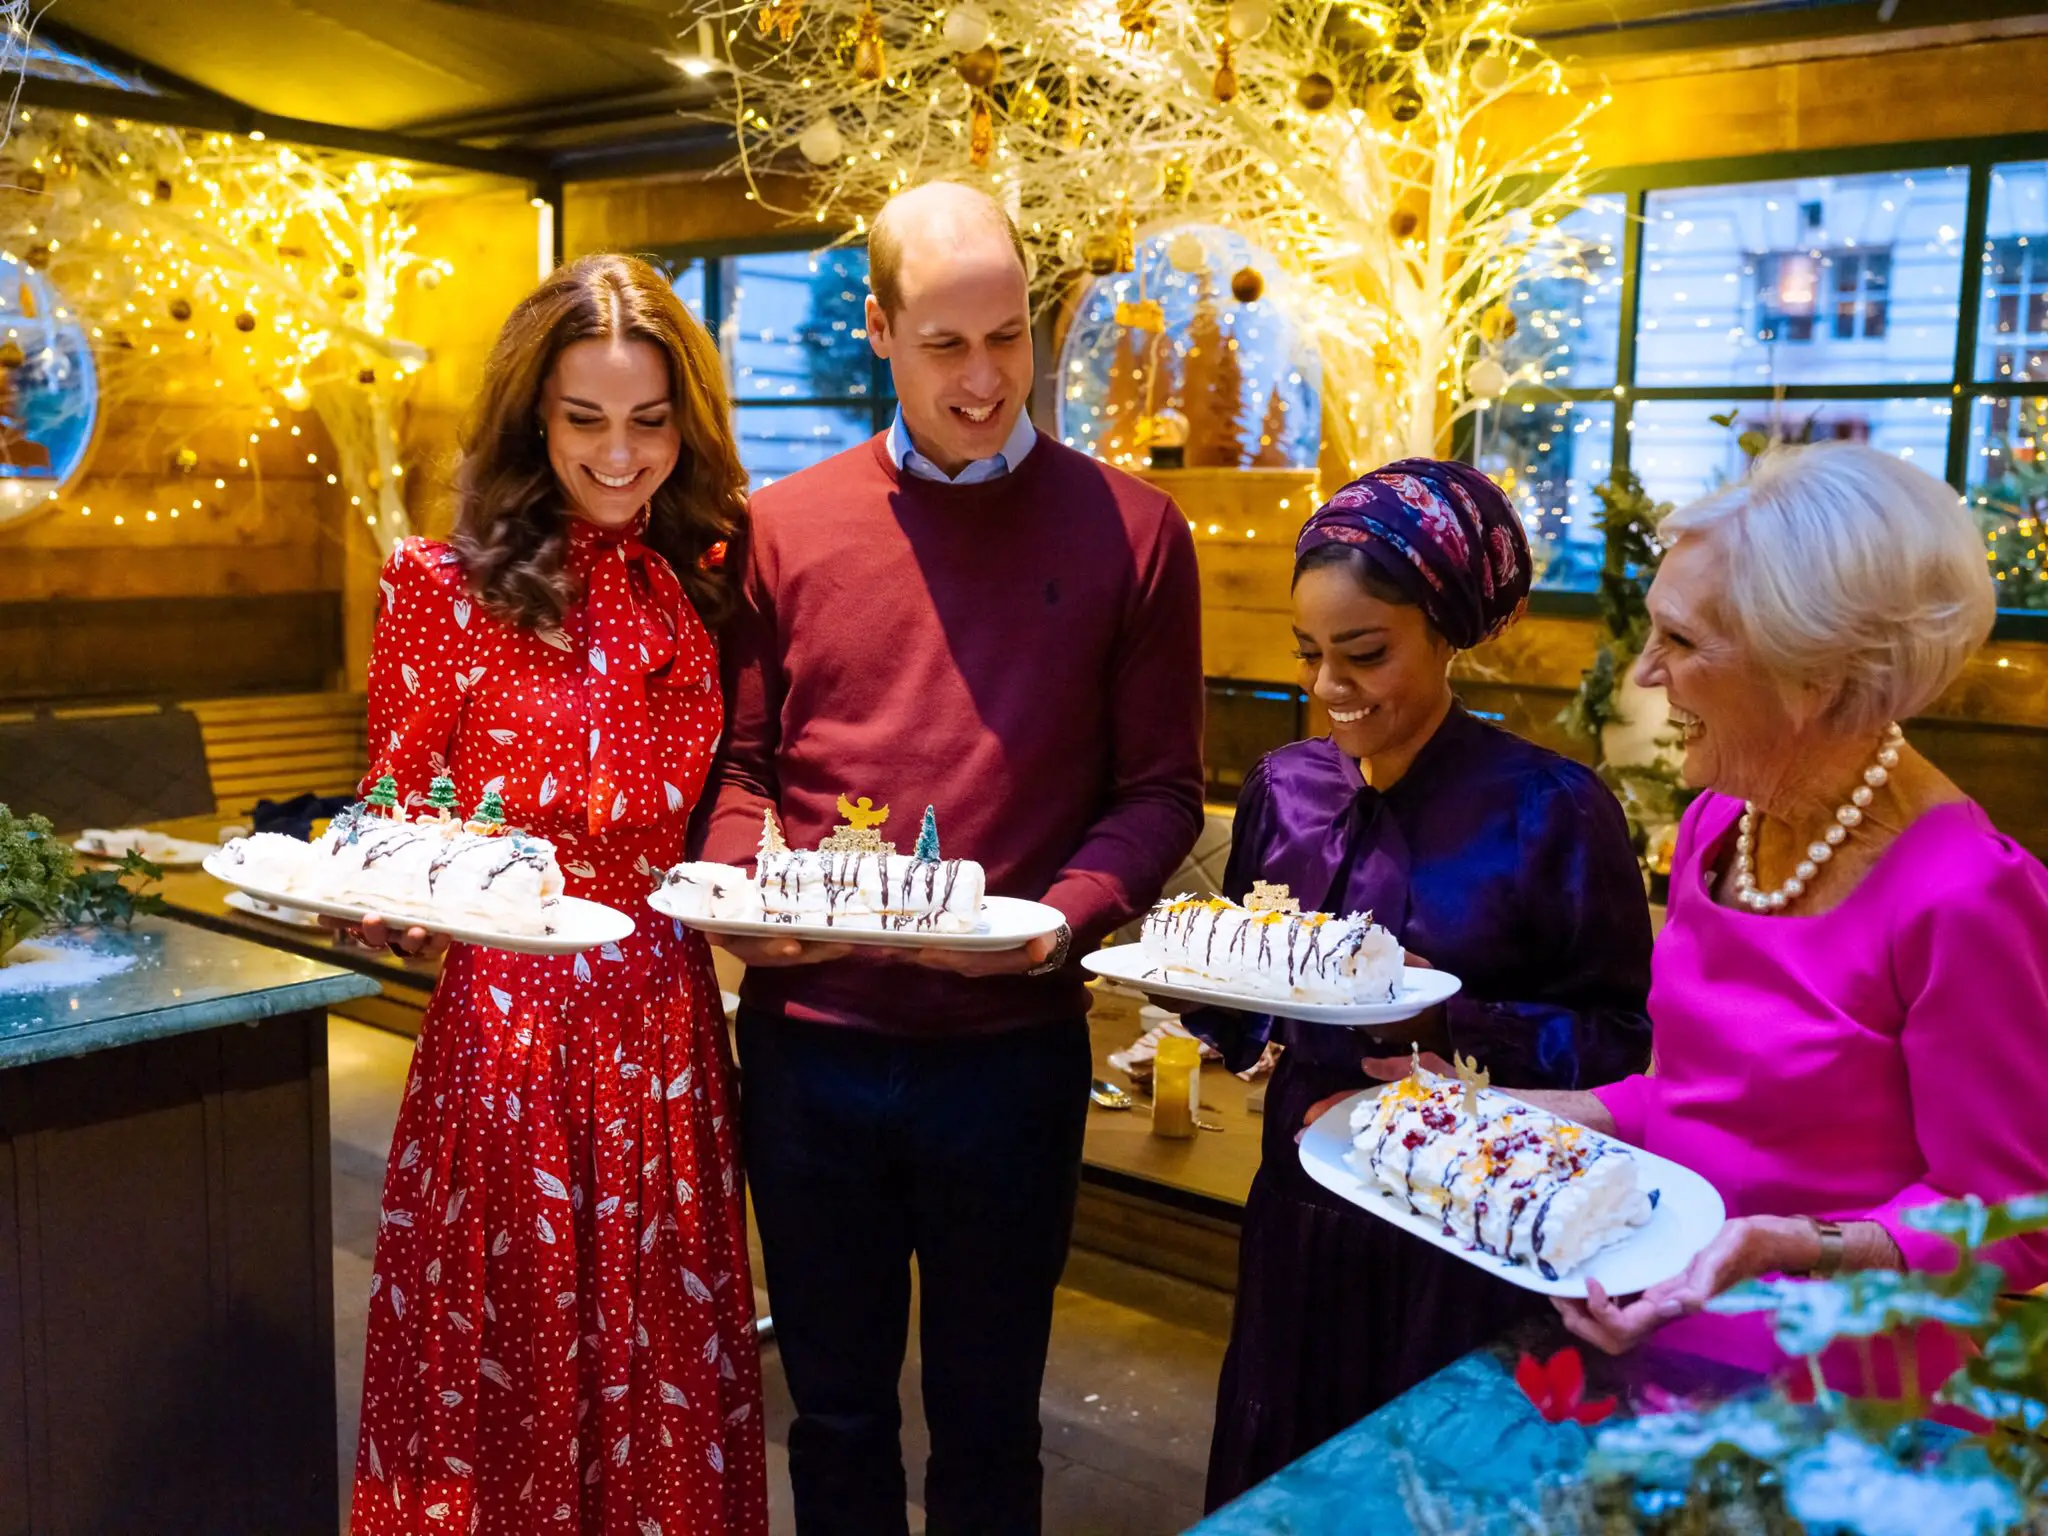 The Duke and Duchess of Cambridge joined cooking legend, Mary Berry, for a new BBC Christmas special